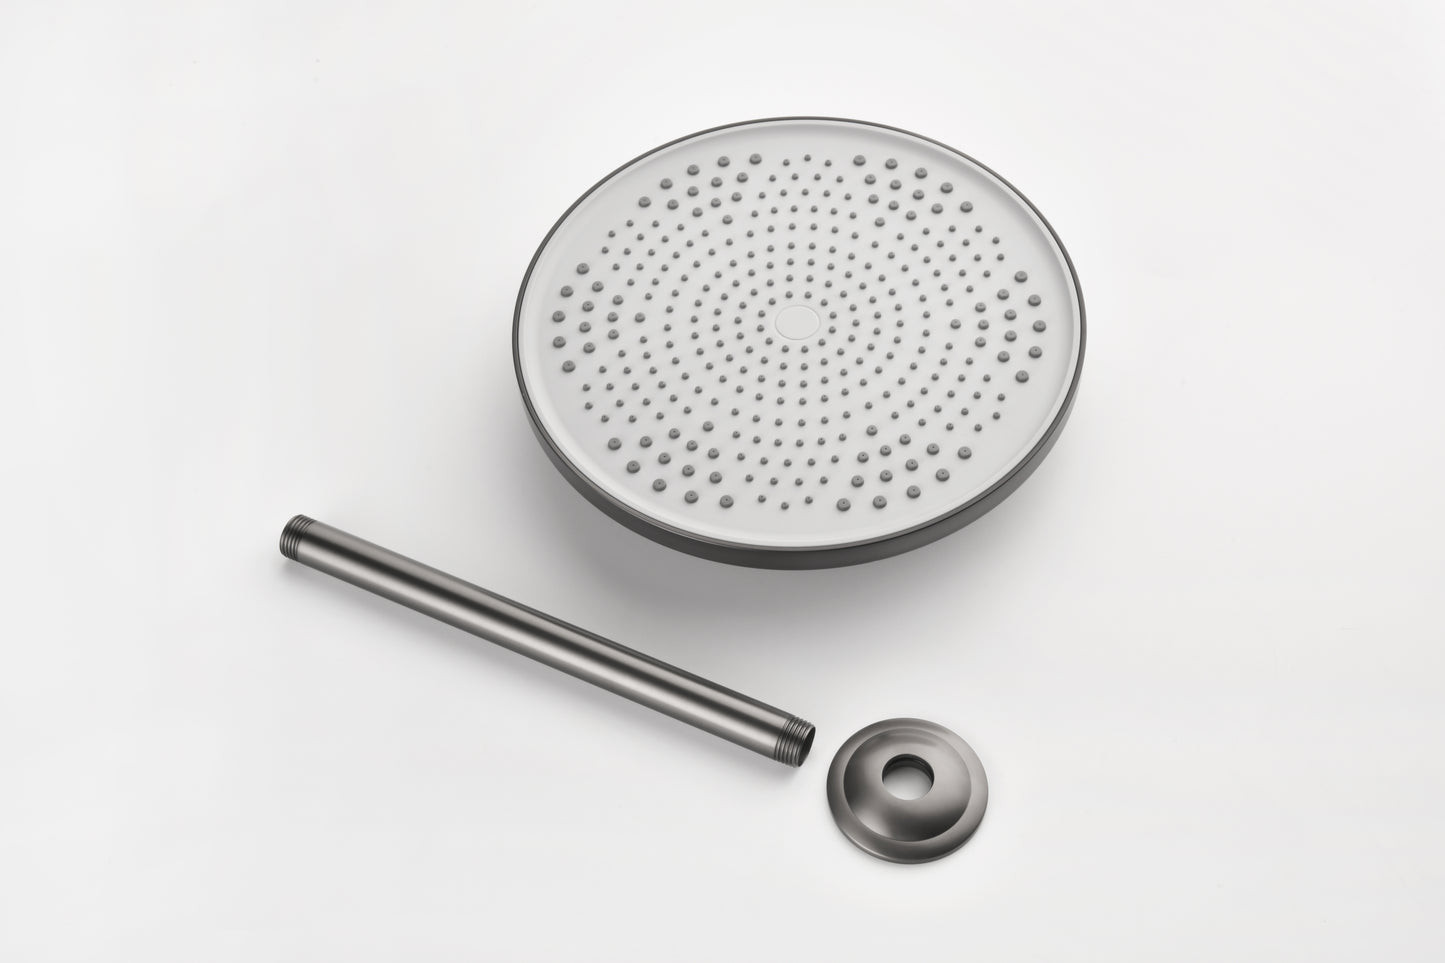 Shower Head - High Pressure Rain - Luxury Modern Look - No Hassle Tool-less 1-Min Installation - The Perfect Adjustable Replacement For Your Bathroom Shower Heads